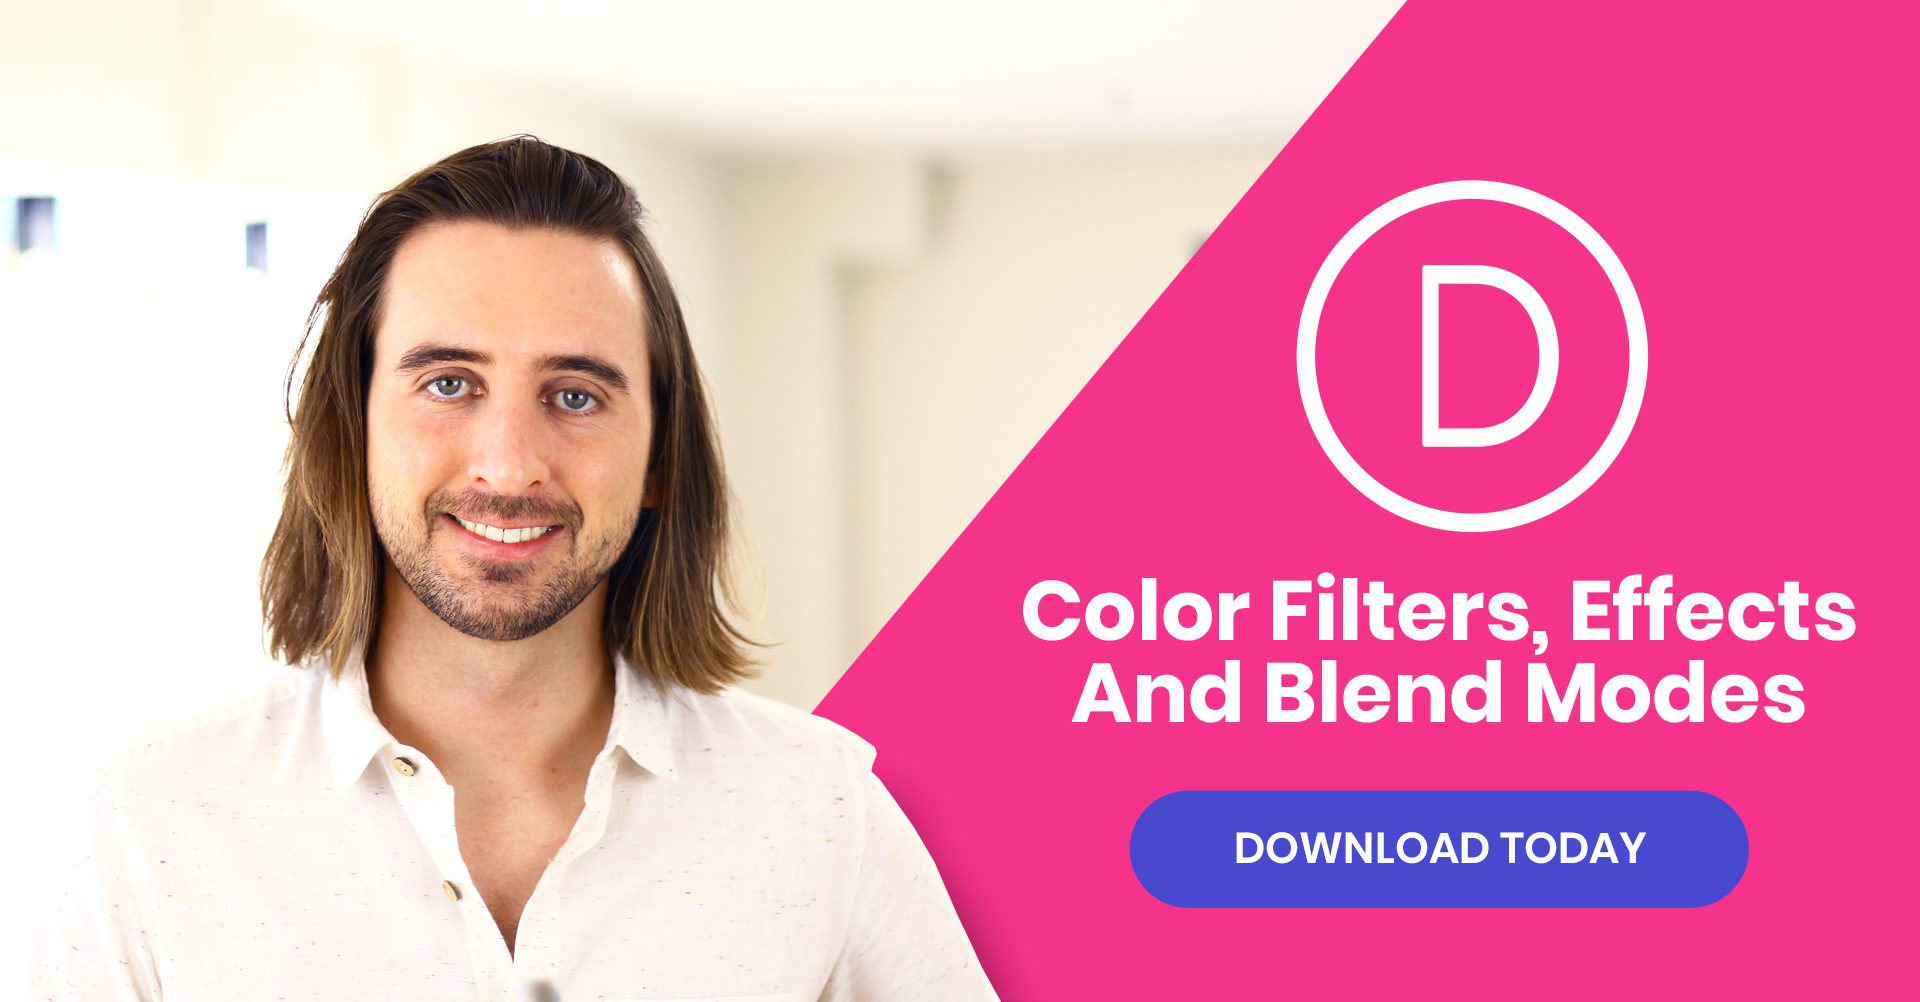 How to enable color filters in the Windows 10 Fall Creators Update